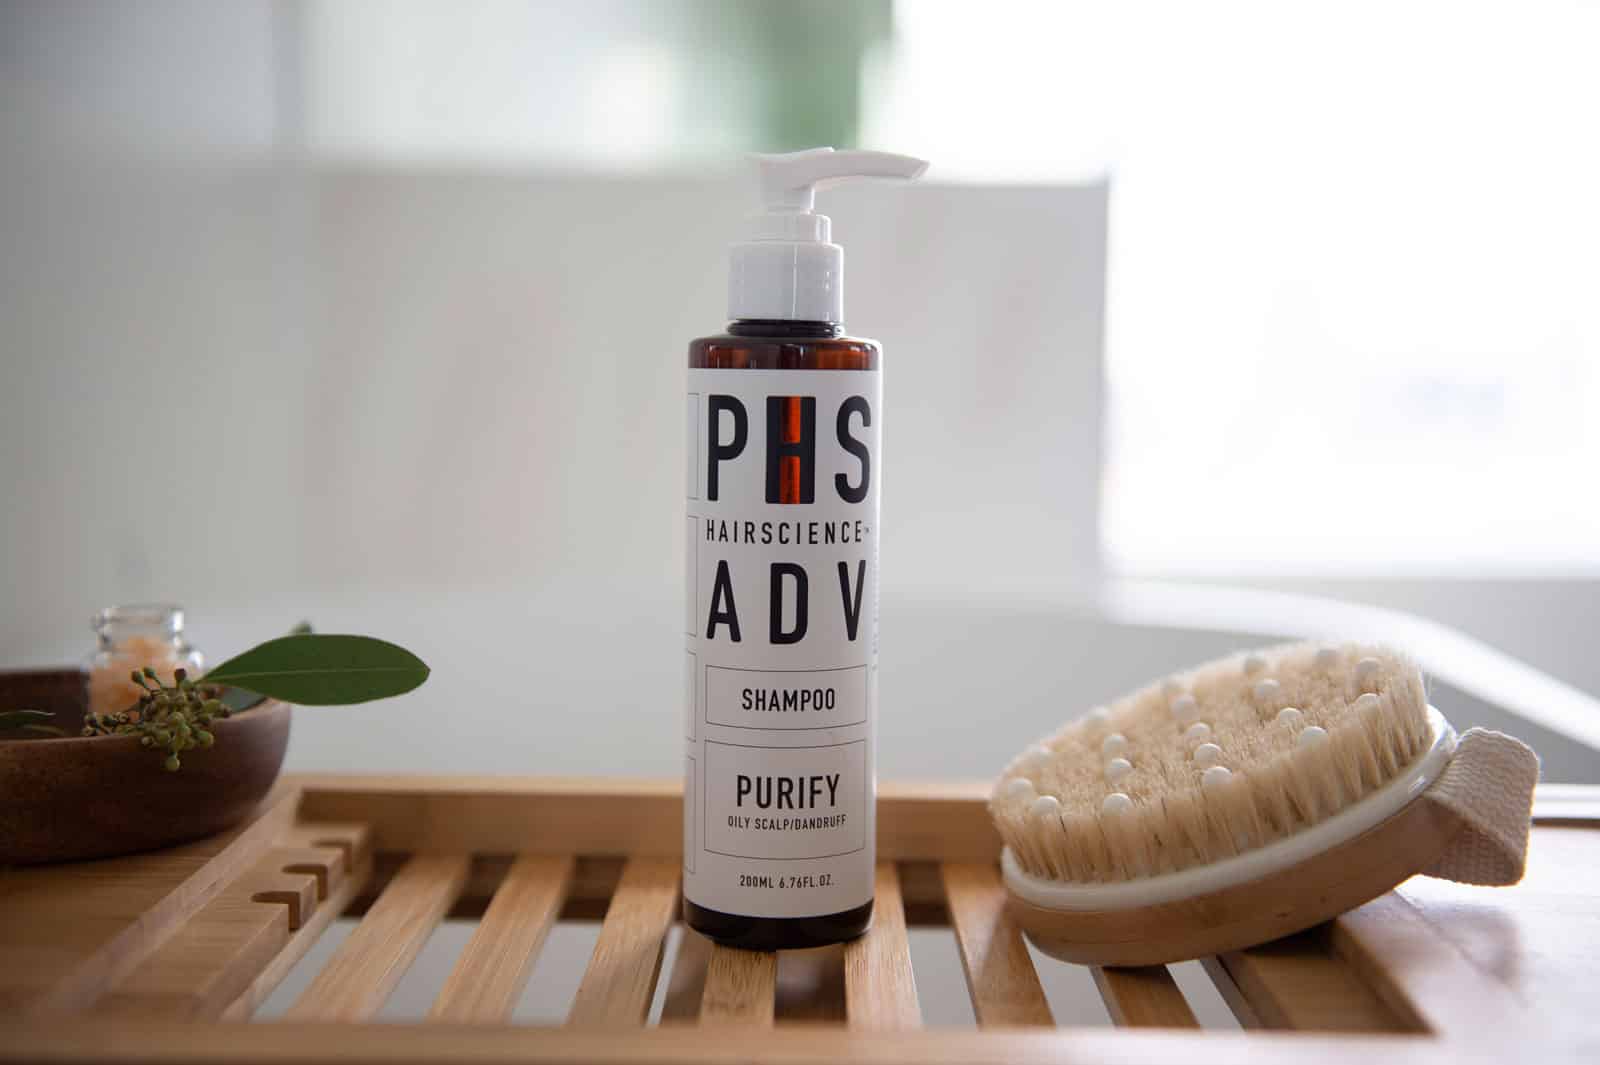 ADV Purify Shampoo for your dandruff issues